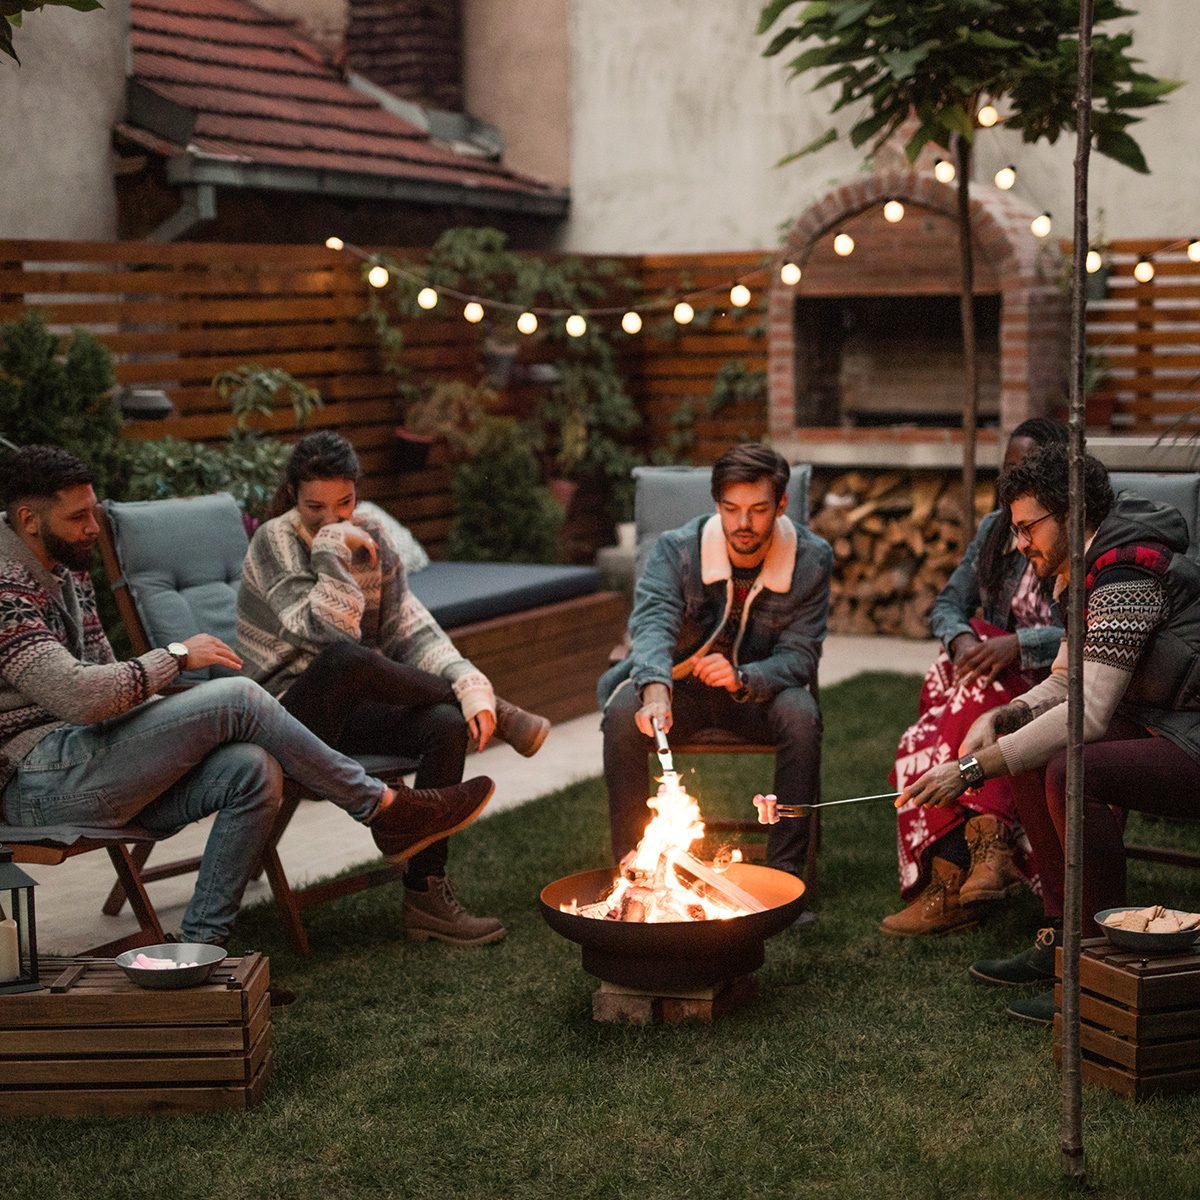 How to Host a Bonfire Party | Taste of Home